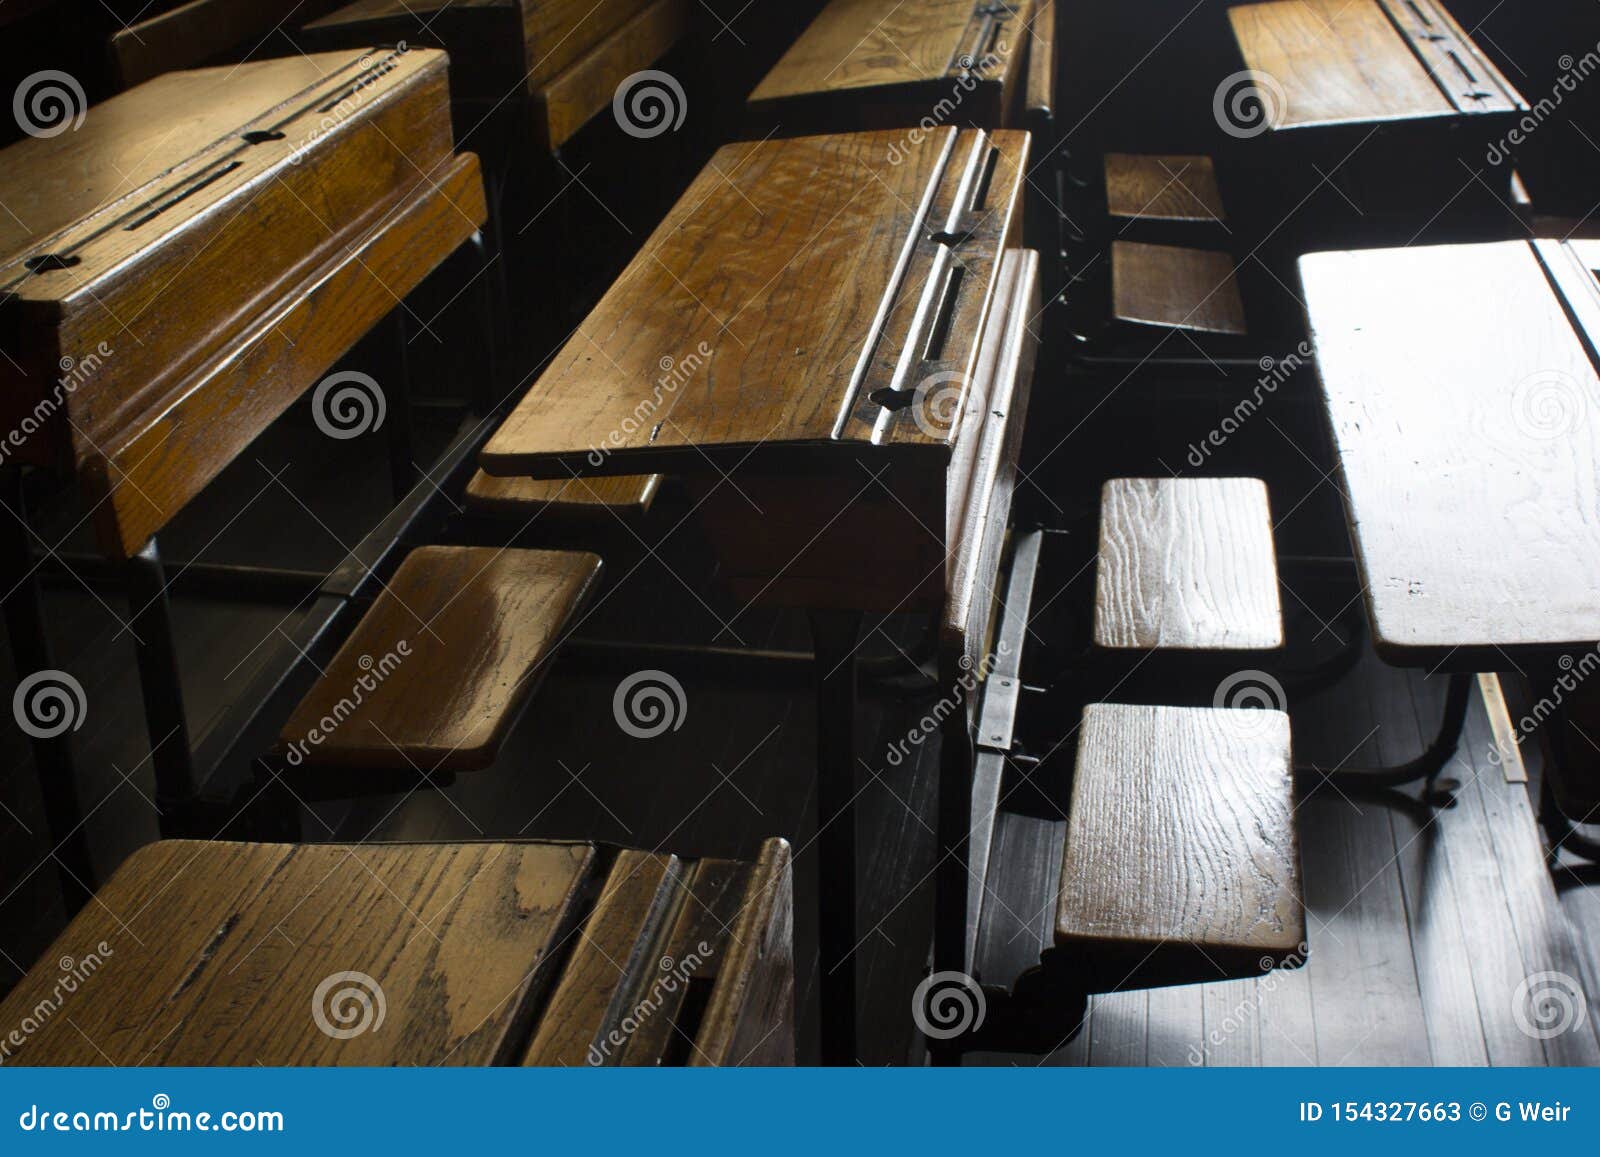 A Old Style School Desks Stock Image Image Of Fashioned 154327663